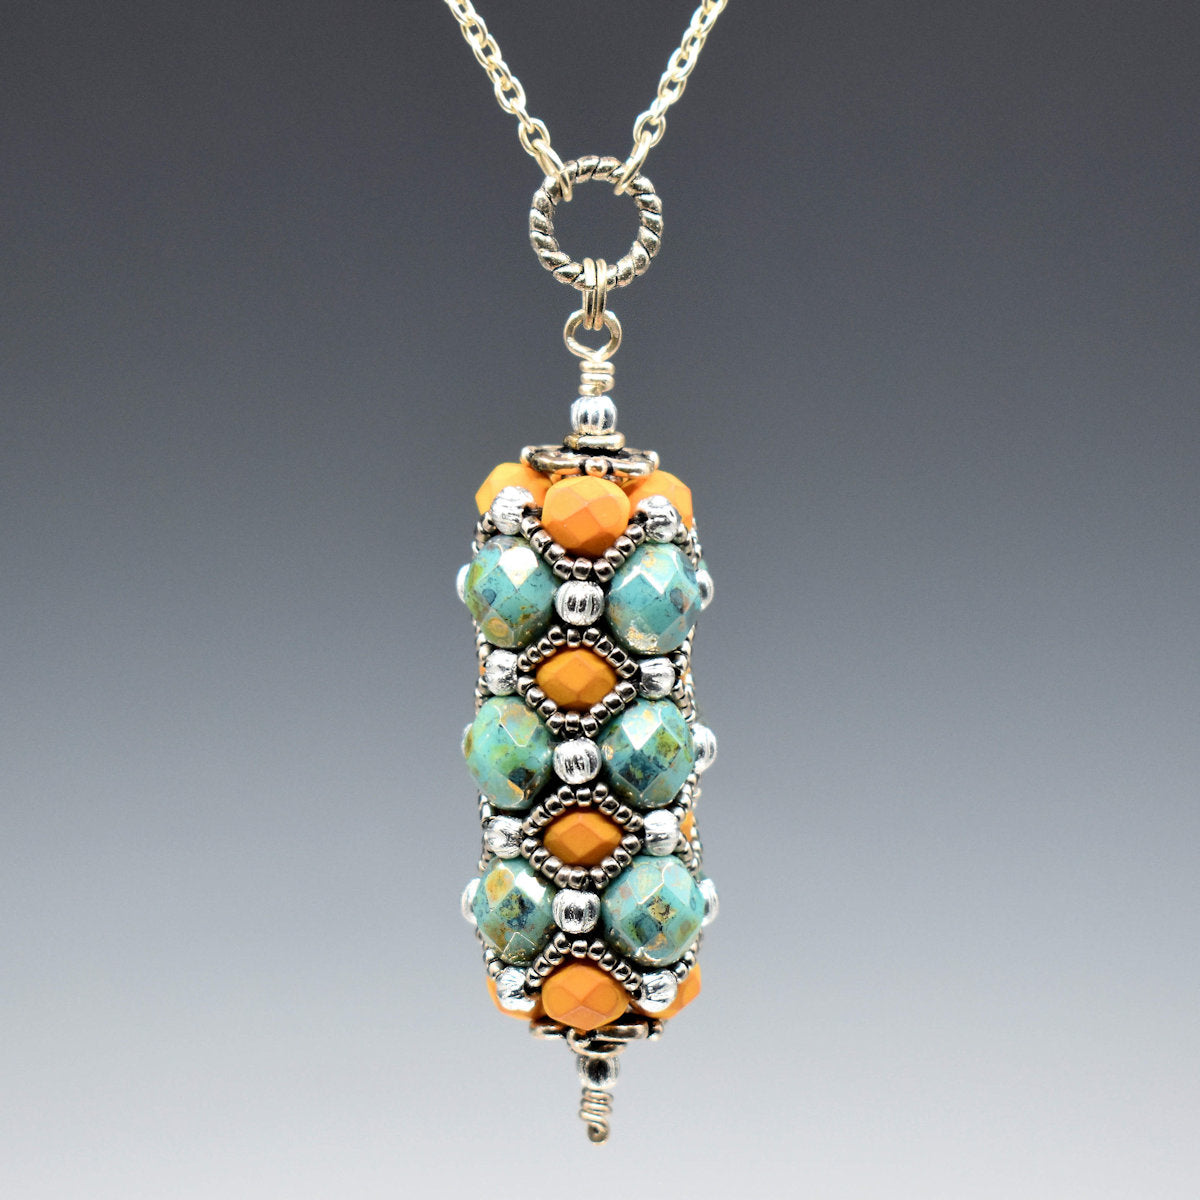 A pendant with orange and turquoise hangs from a rope textured circle and silver colored chain. The pendant is a column of bronzed turquoise faceted beads alternating with soft orange beads, all of which are overlaid with a silver seed bead netting. 